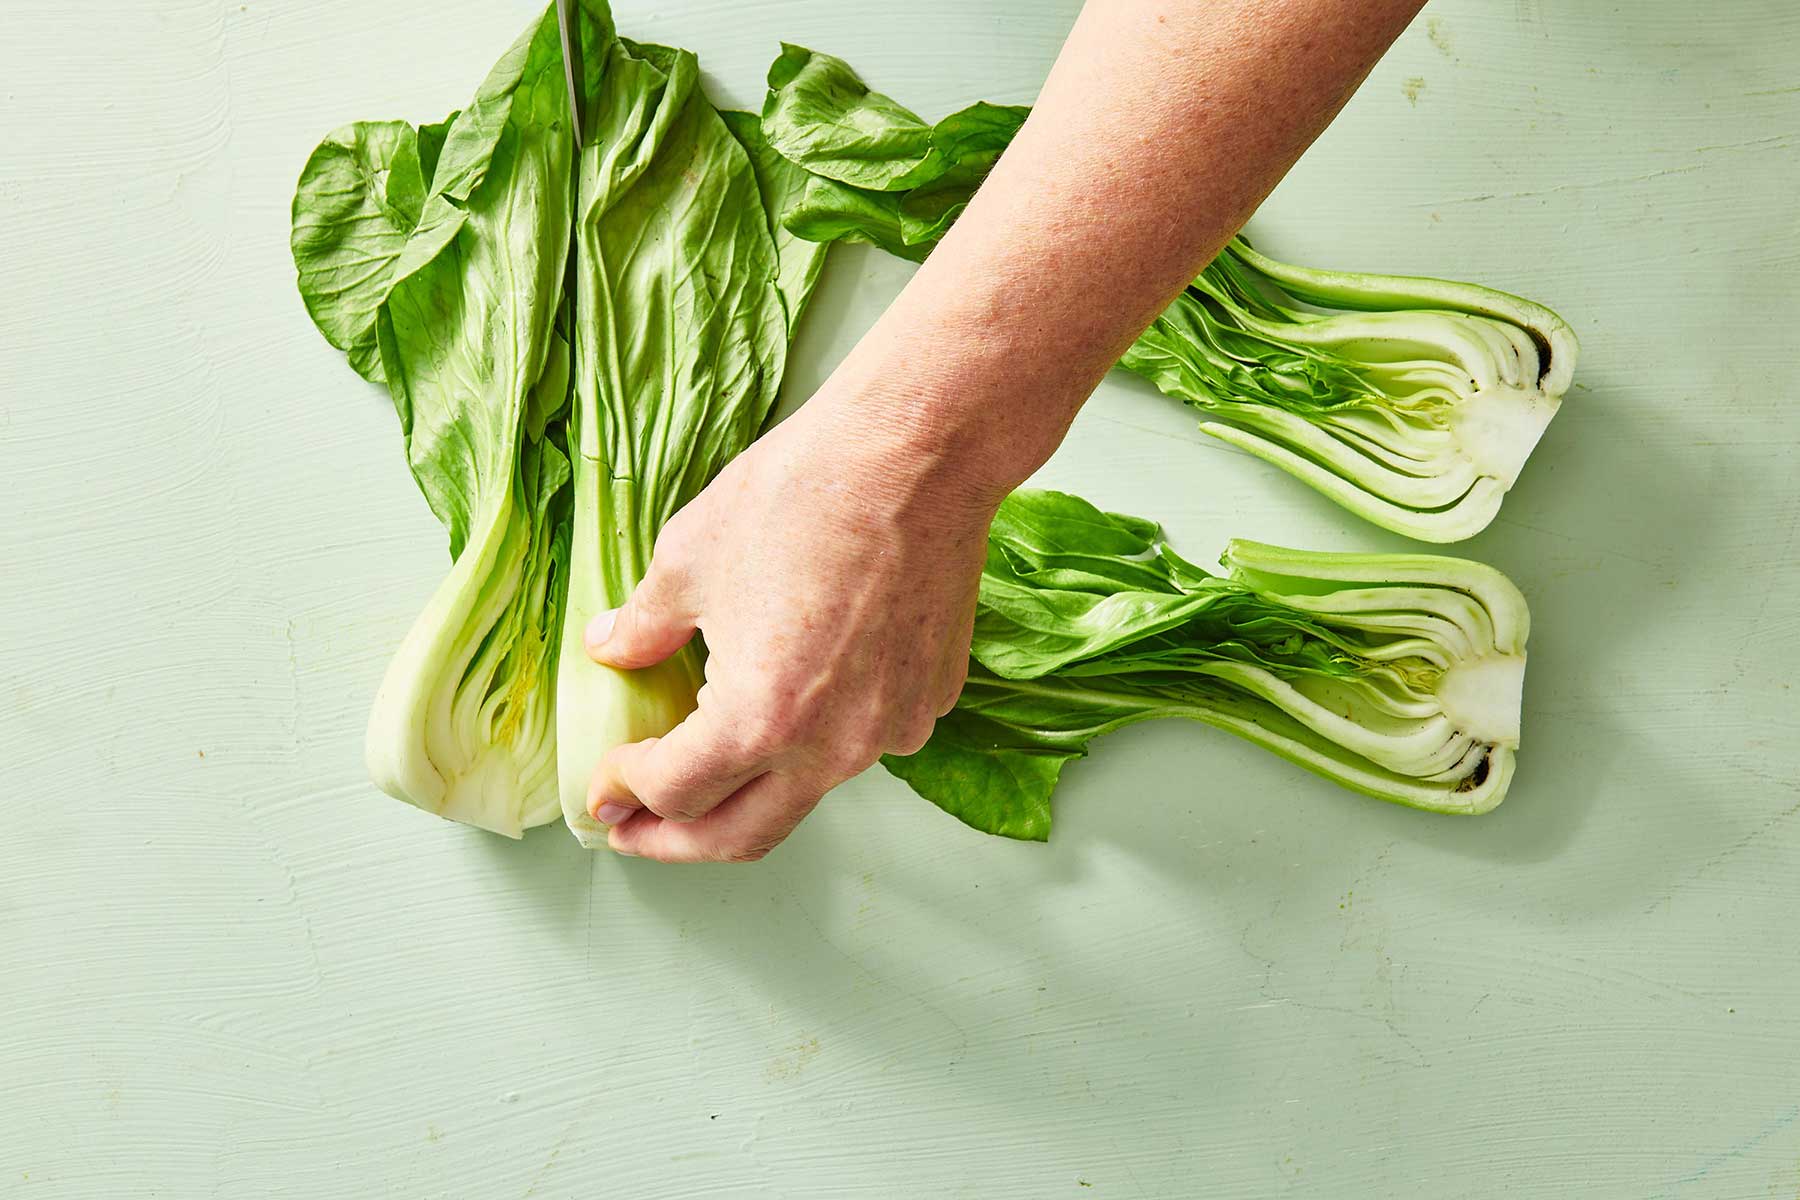 Person using a knife to slice baby bok choy lengthwise.